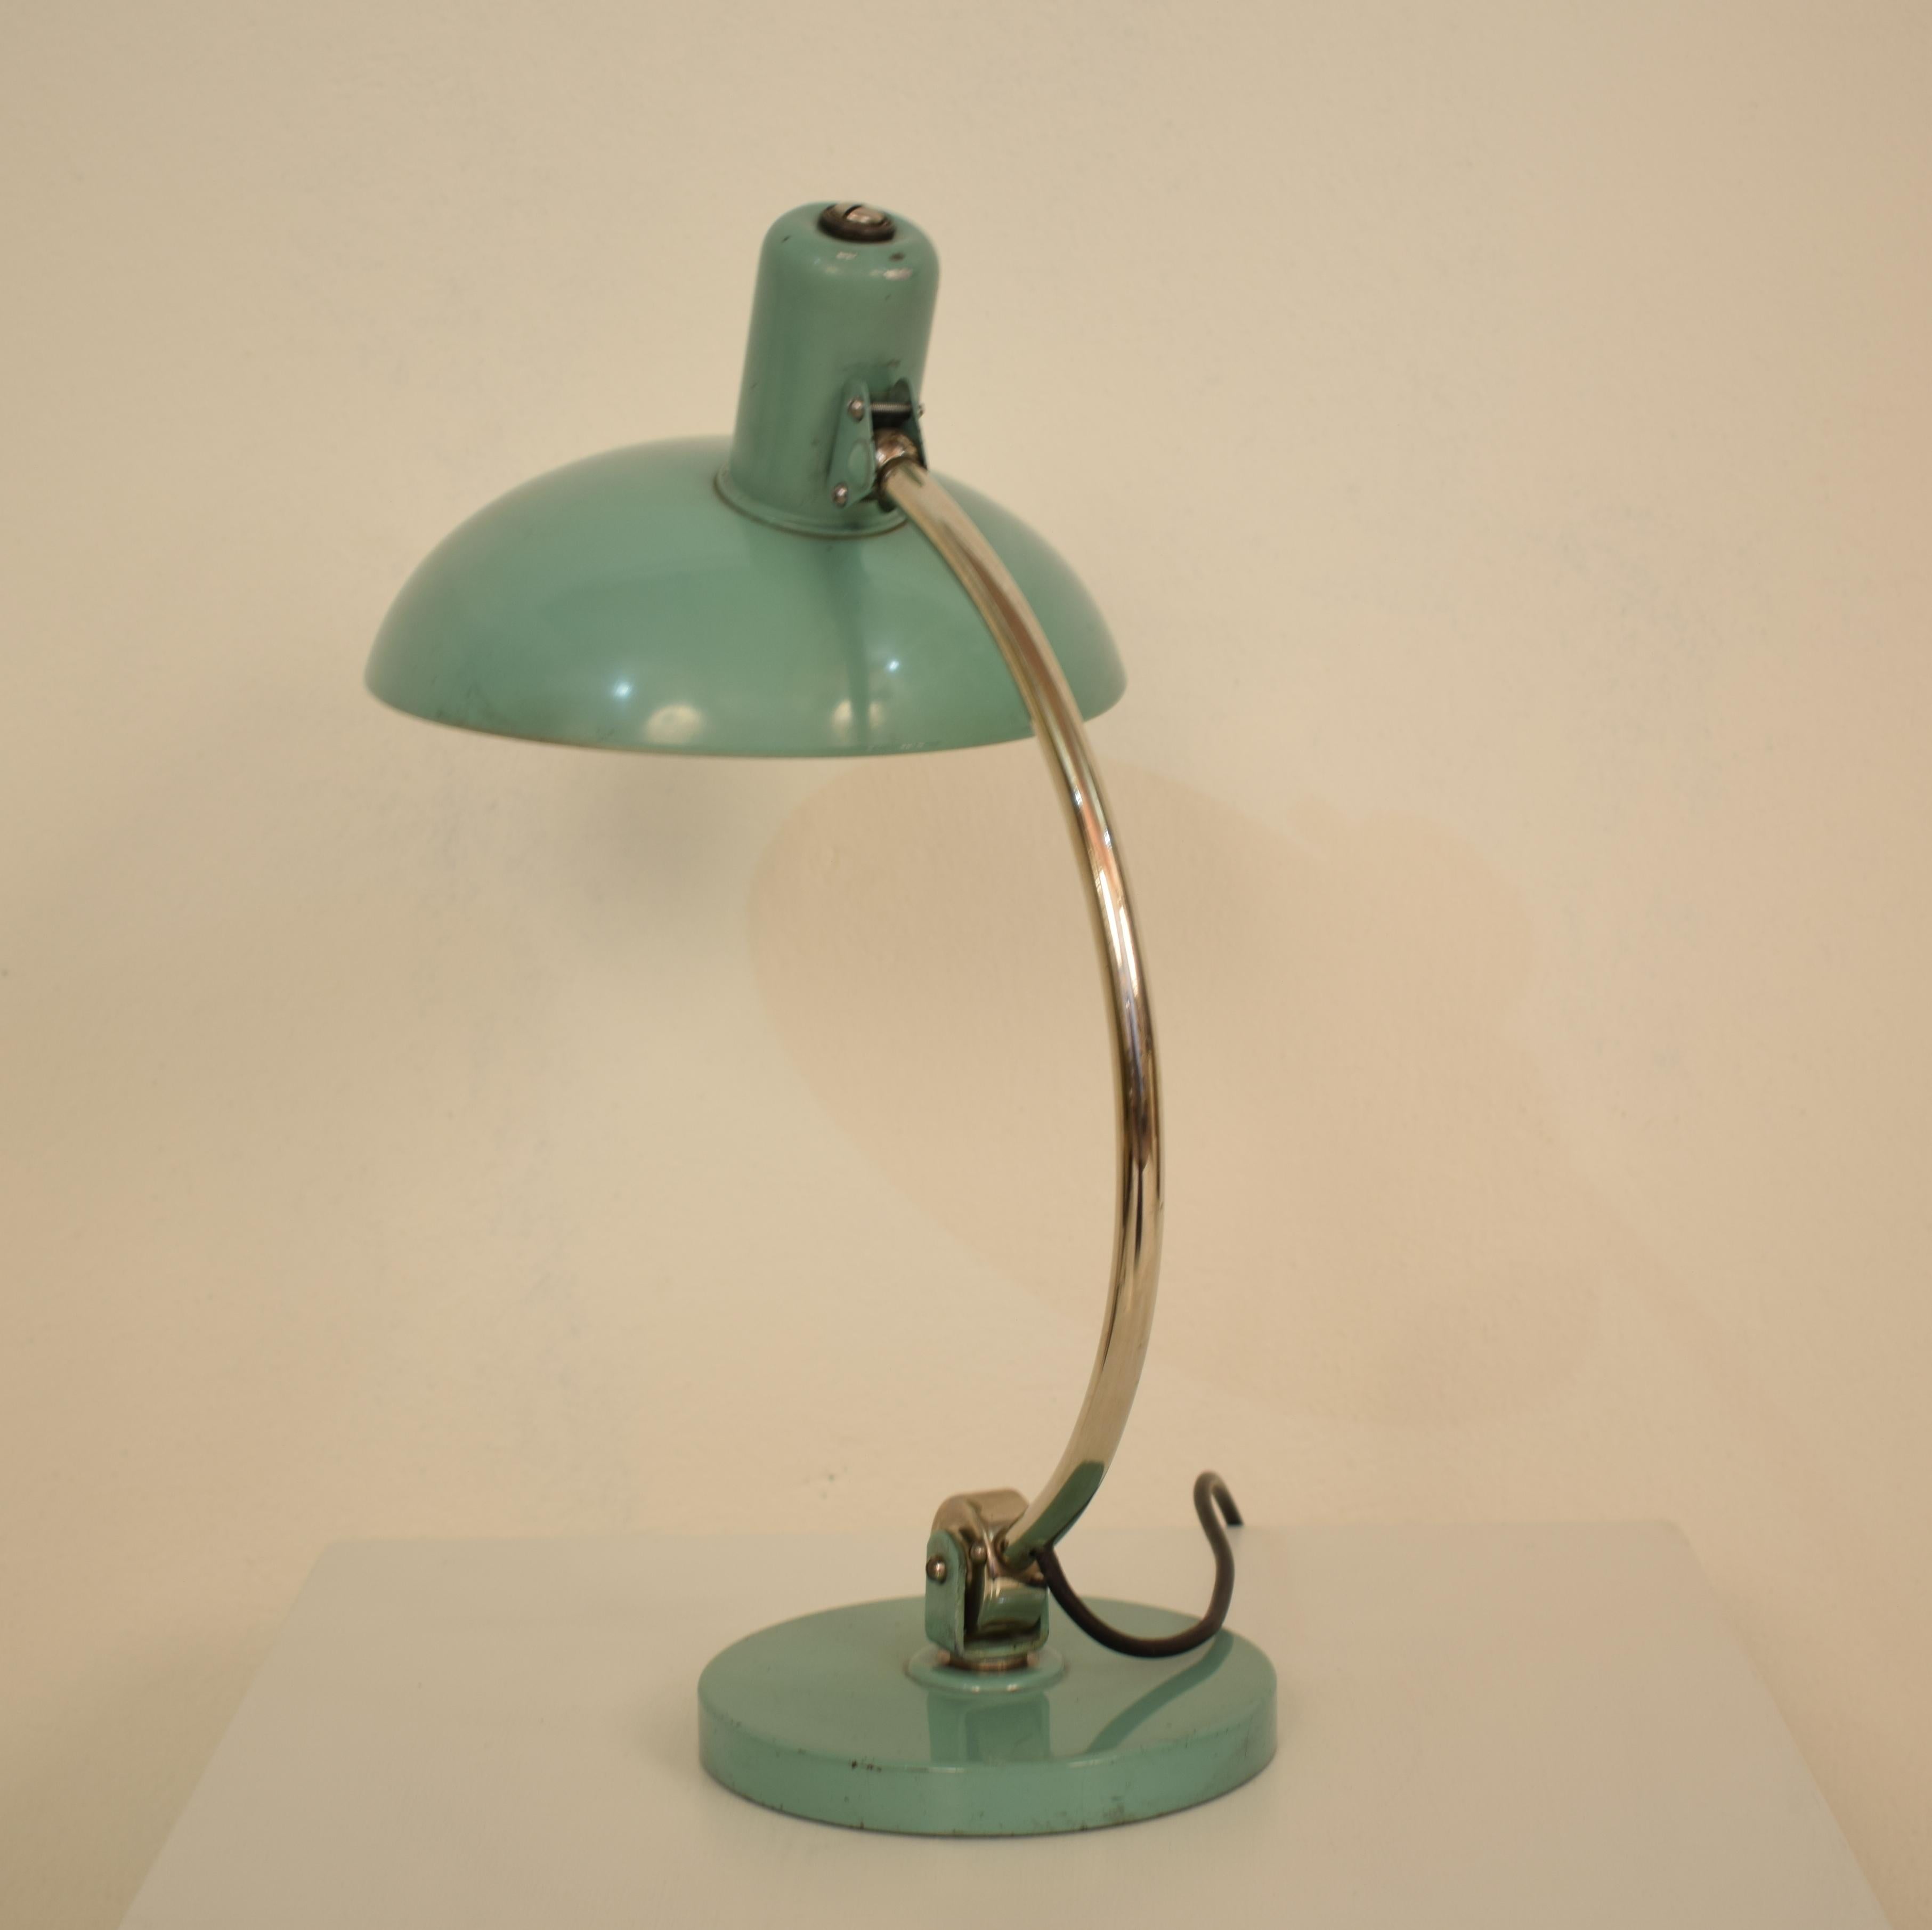 German Midcentury Mint Green Table Lamp by Kaiser Idell, circa 1960